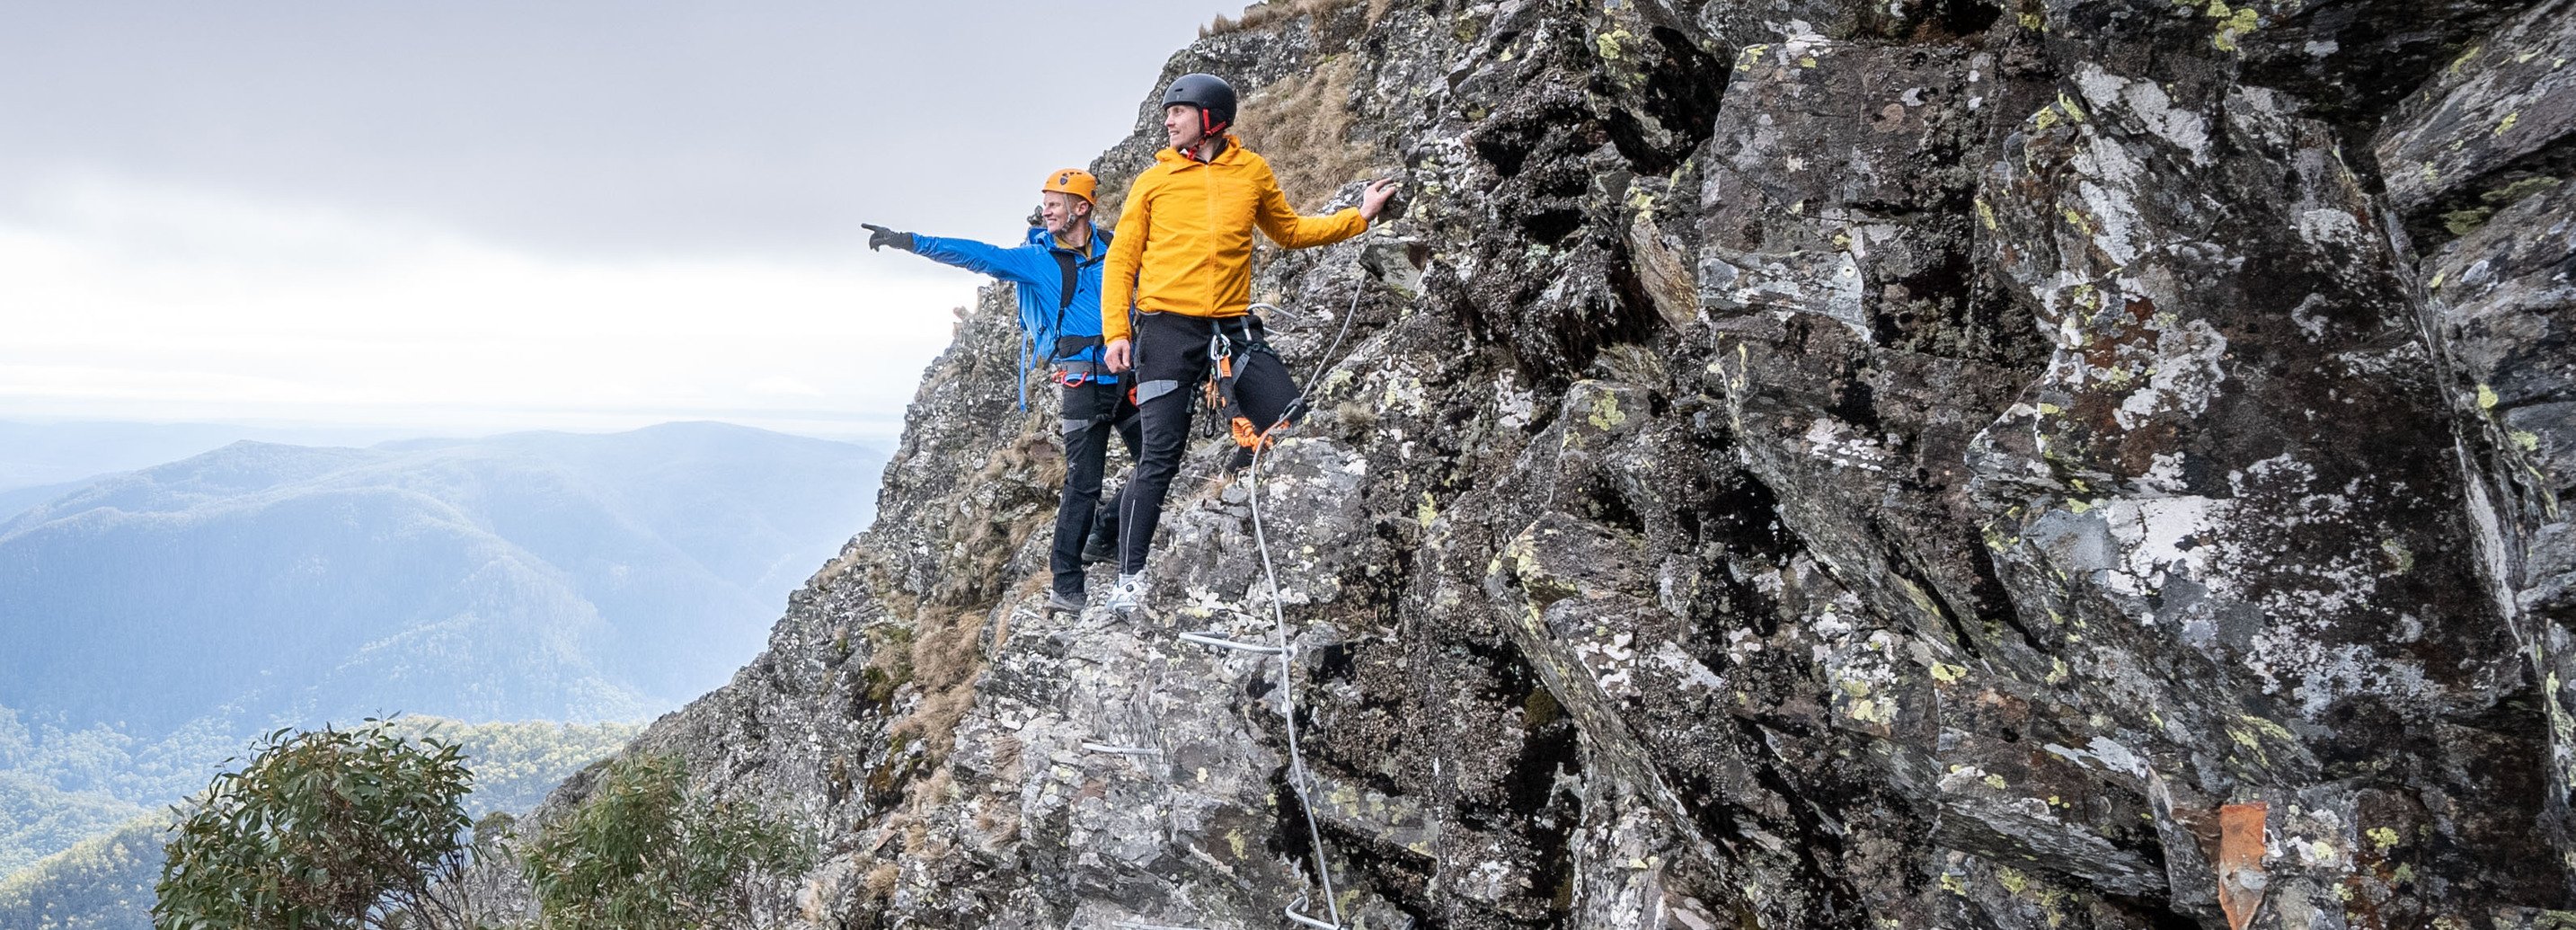 A guide and climber take in the stunning view from the RockWire 'via ferrata' course across the Delatite Valley